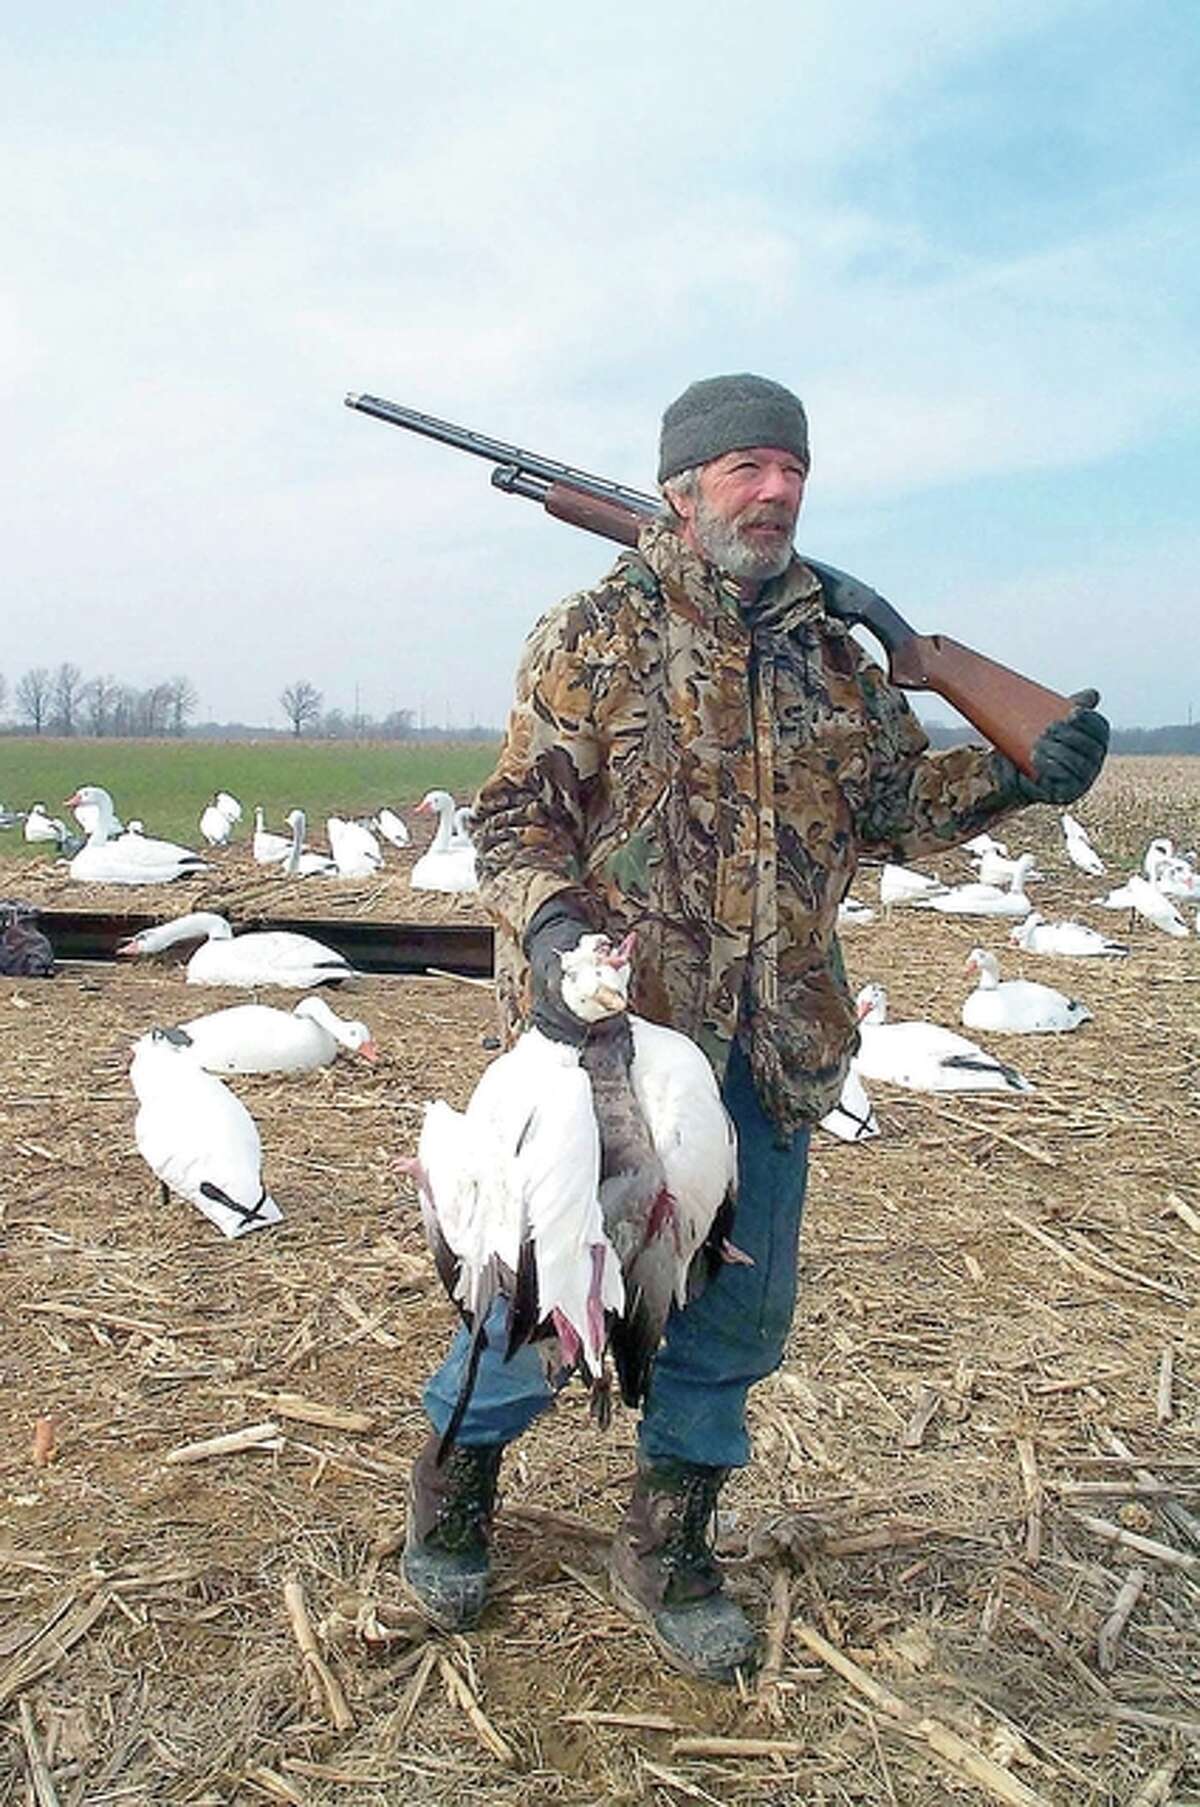 According to the IDNR’s proposal to the Fish and Wildlife Service, Illinois waterfowlers can look for little change in this year’s waterfowl season regulations.